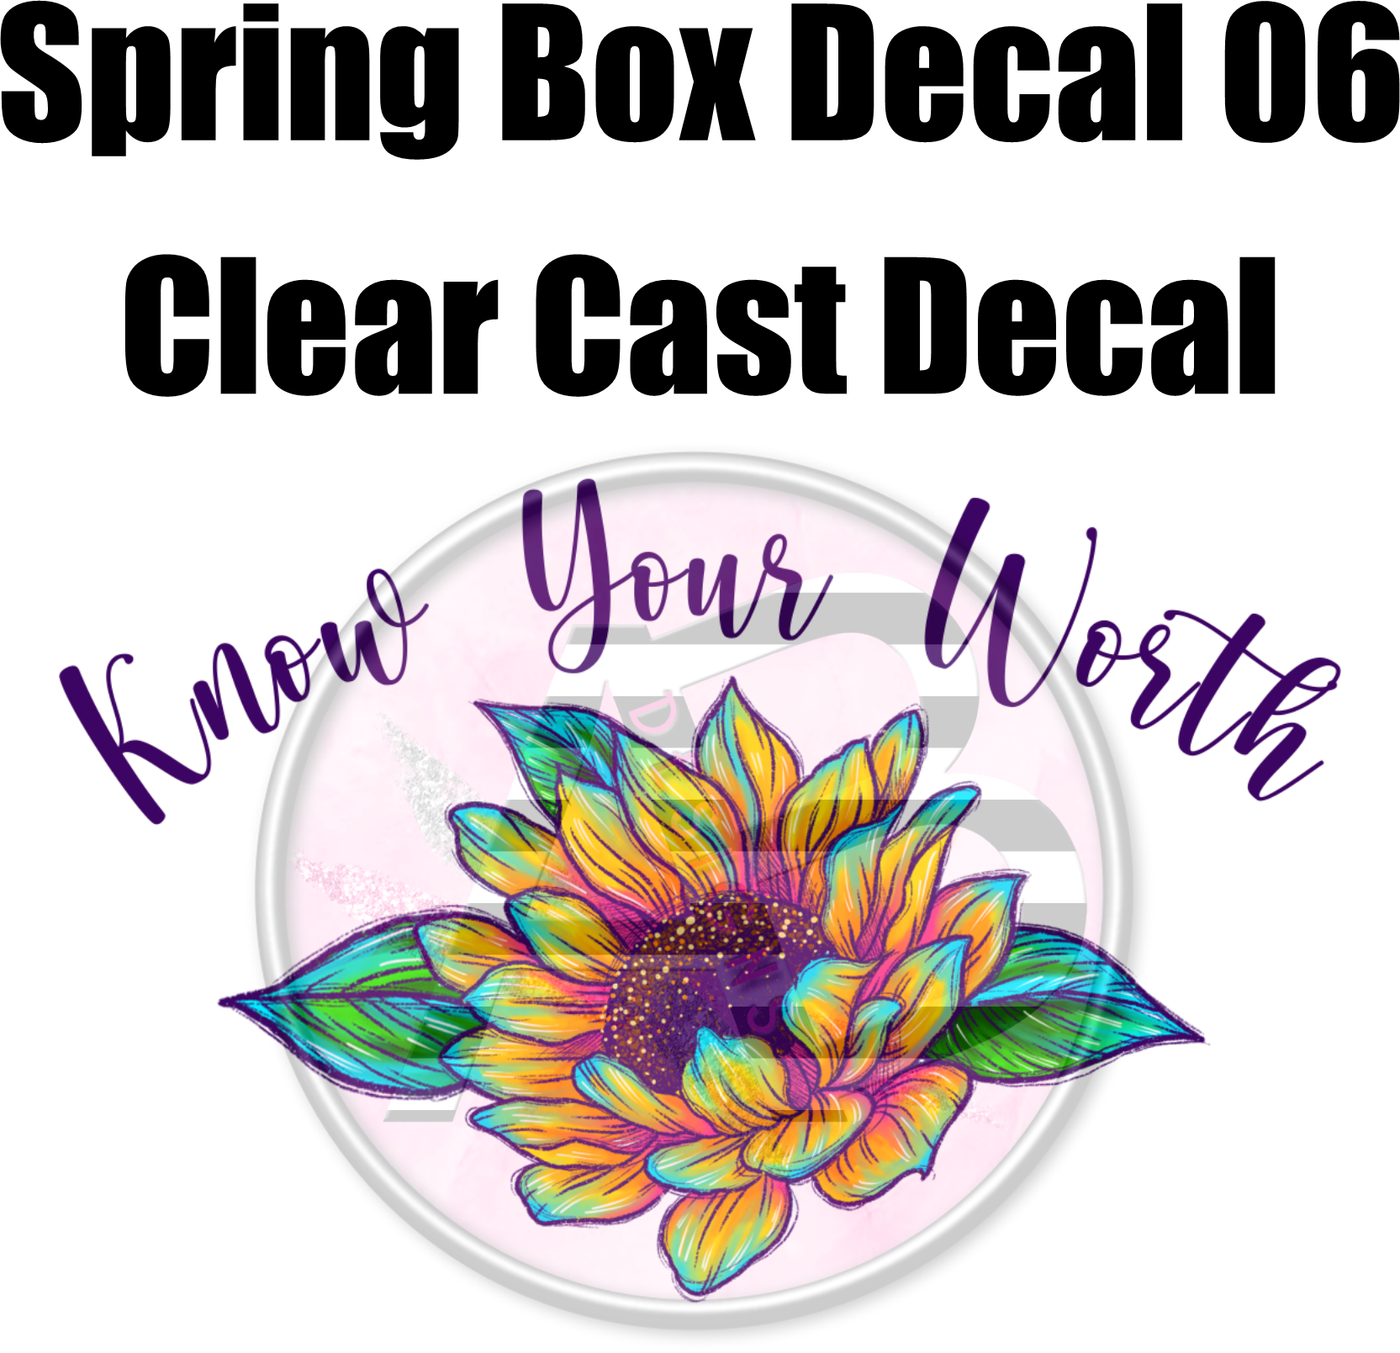 Spring Box Decal 06 - Clear Cast Decal